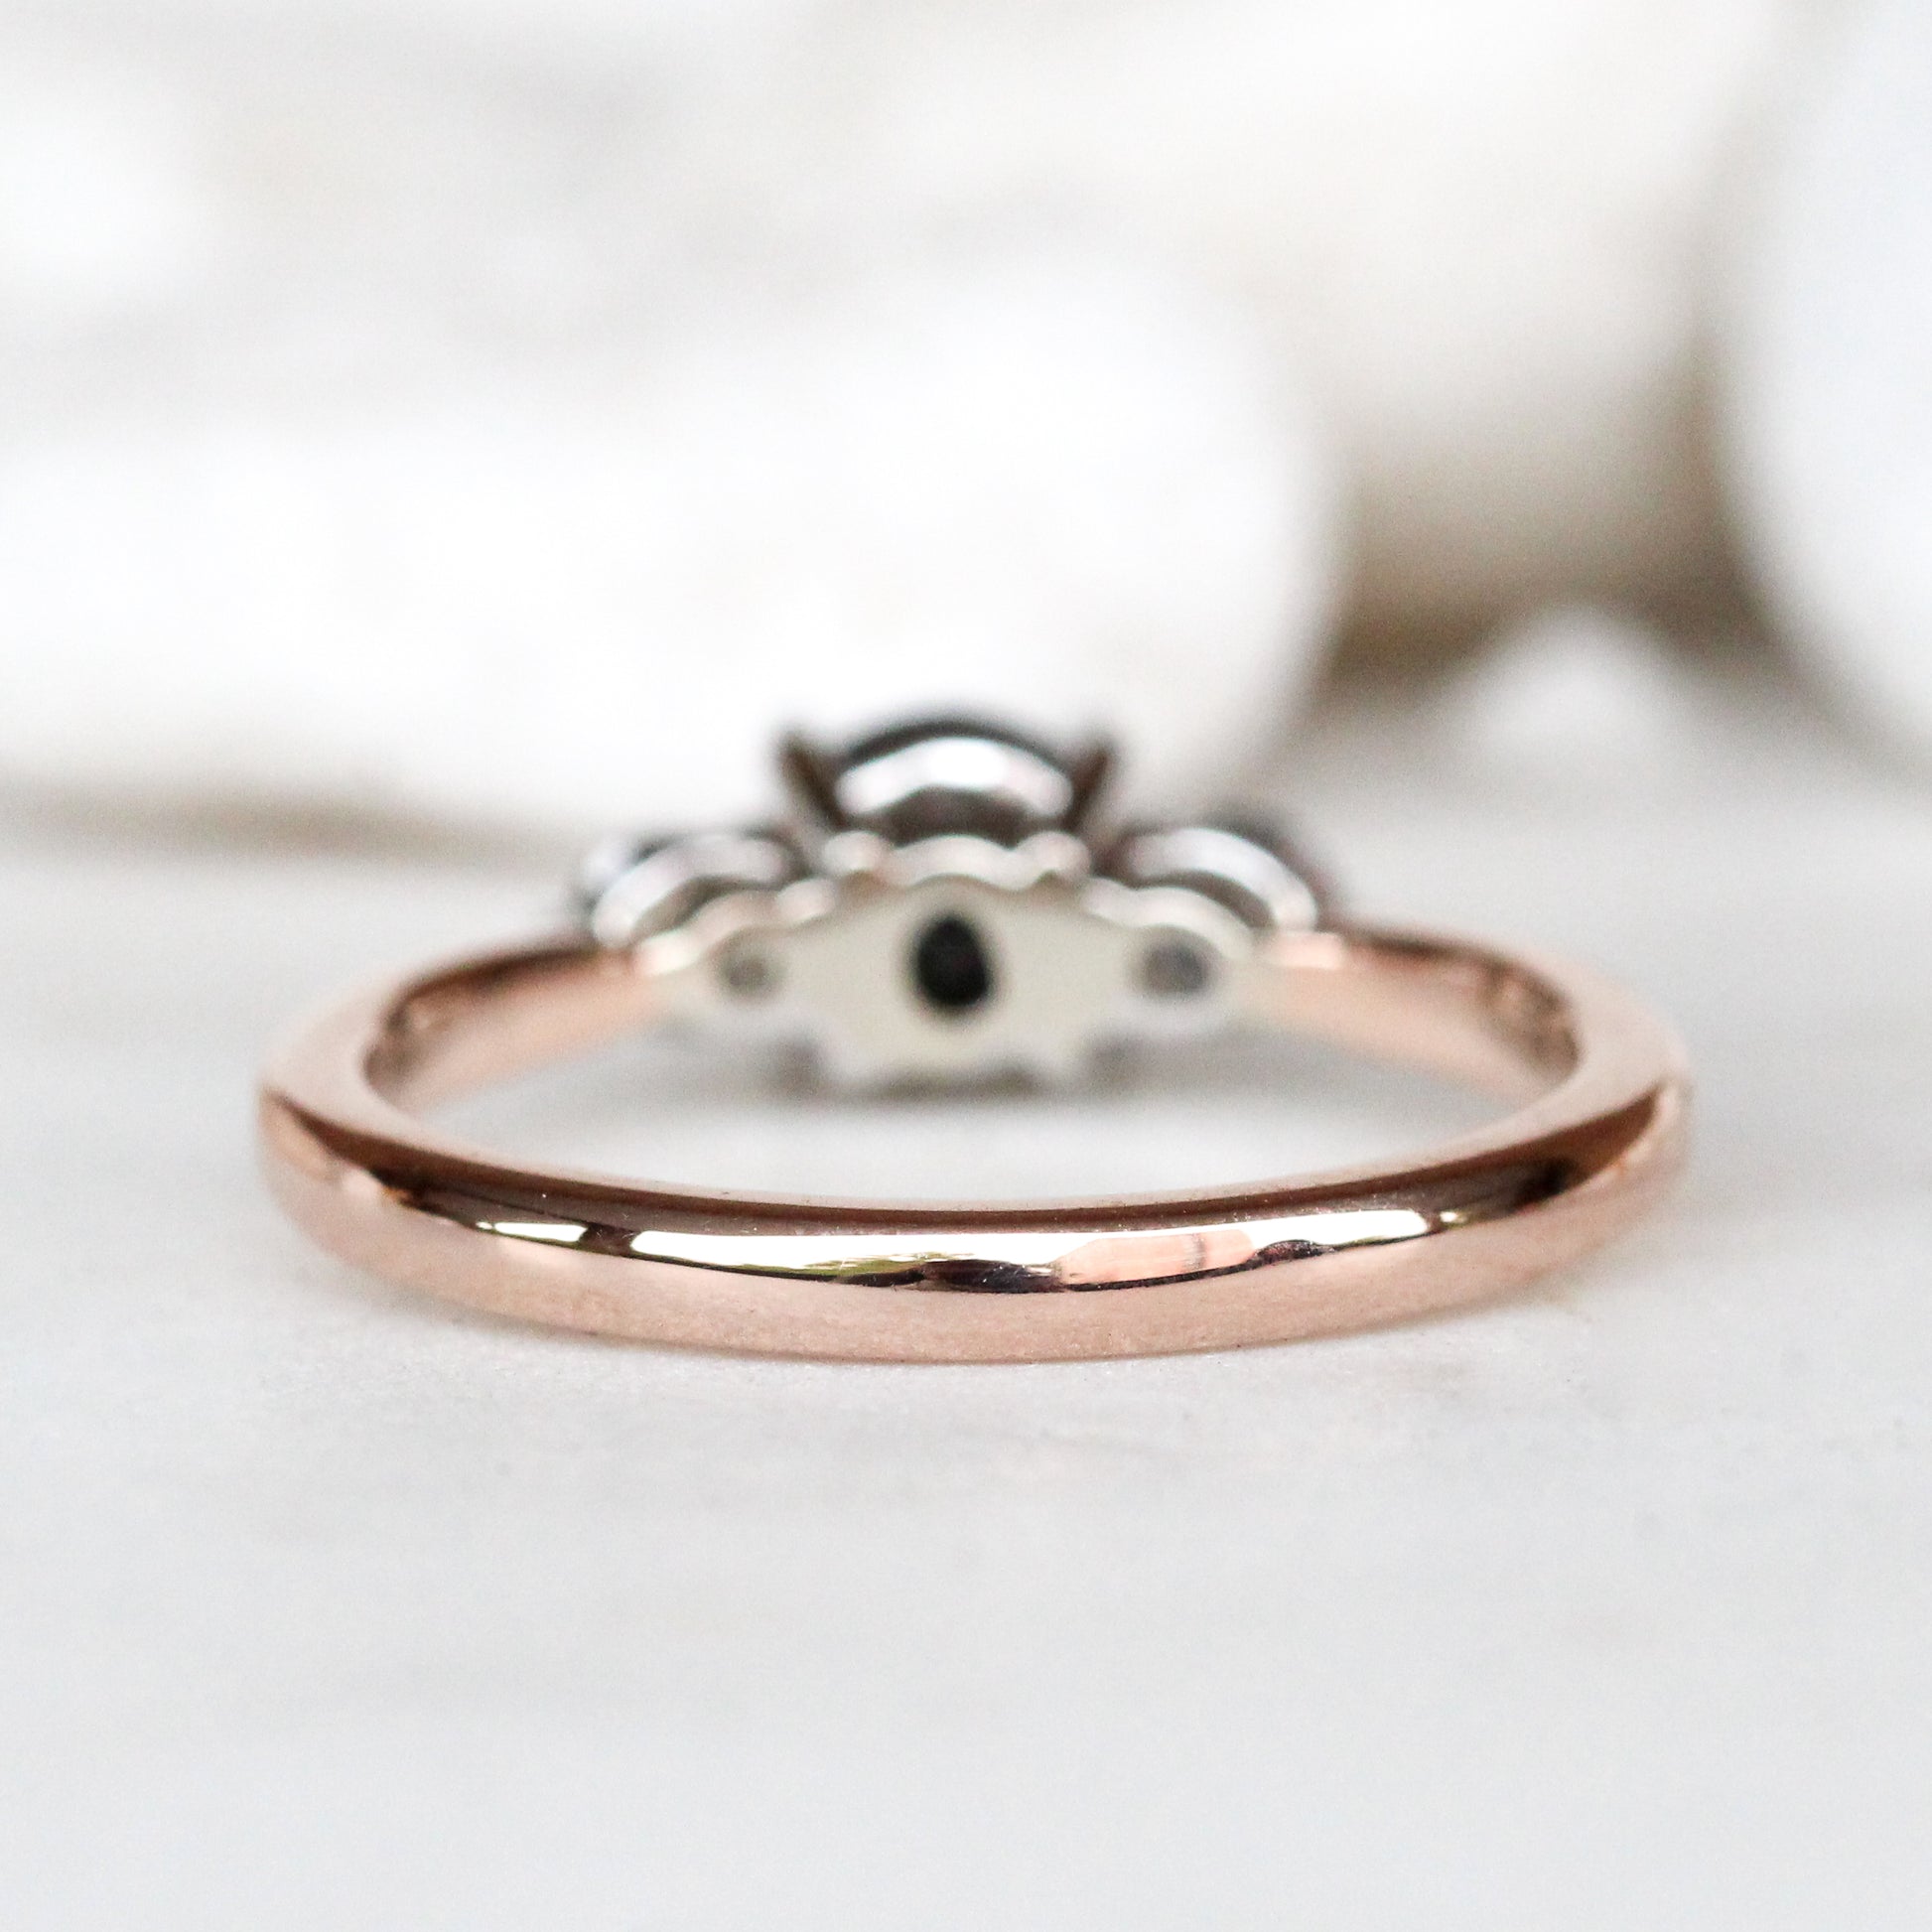 CAELEN - Terra Ring with Carat Black Diamond and White Diamond Accents in 14k Rose Gold - Ready to Size and Ship - Midwinter Co. Alternative Bridal Rings and Modern Fine Jewelry